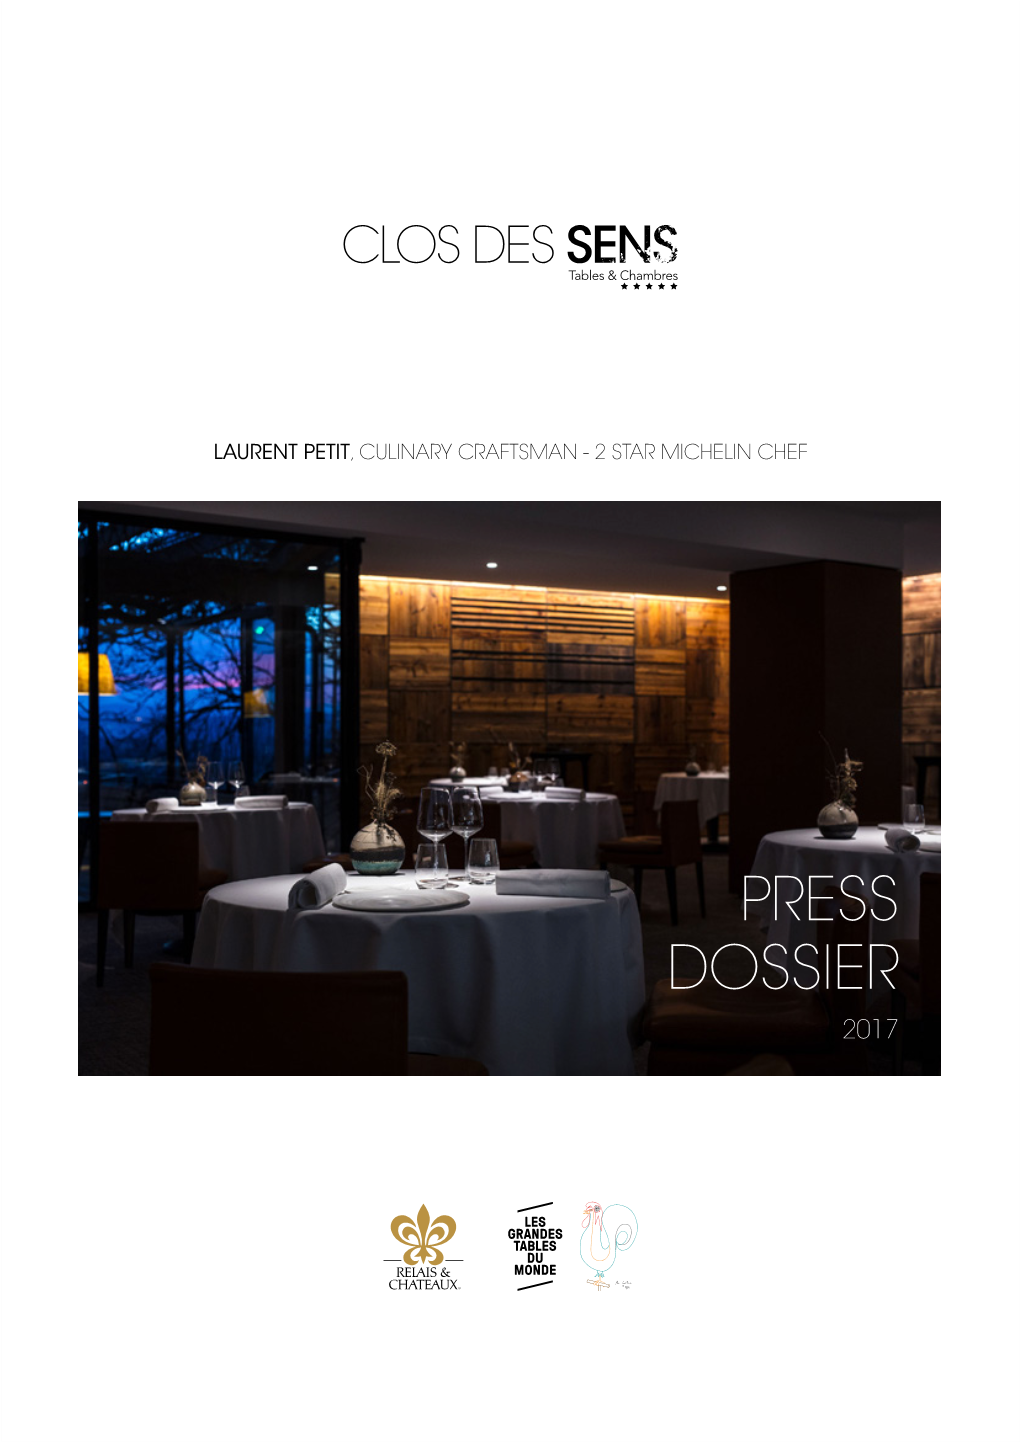 DOSSIER DE PRESSE2017 2017 « Pure and Refined, the Setting Serves Marvellously Laurent Petit’S Subtle and Inventive Cooking: Green, Riparian, and Unique